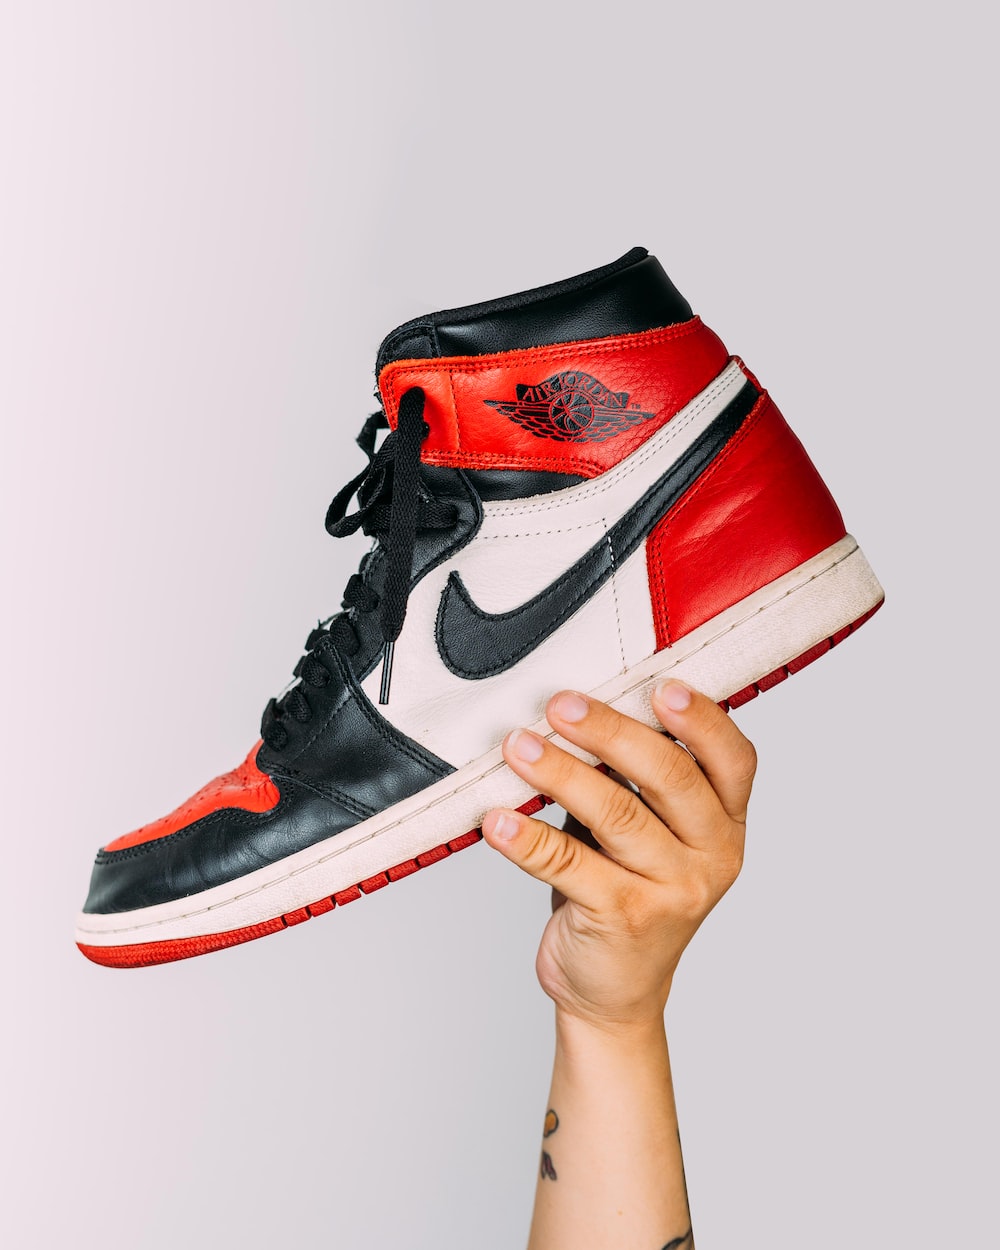 Person holding red and white nike air jordan shoe photo â free shoe image on